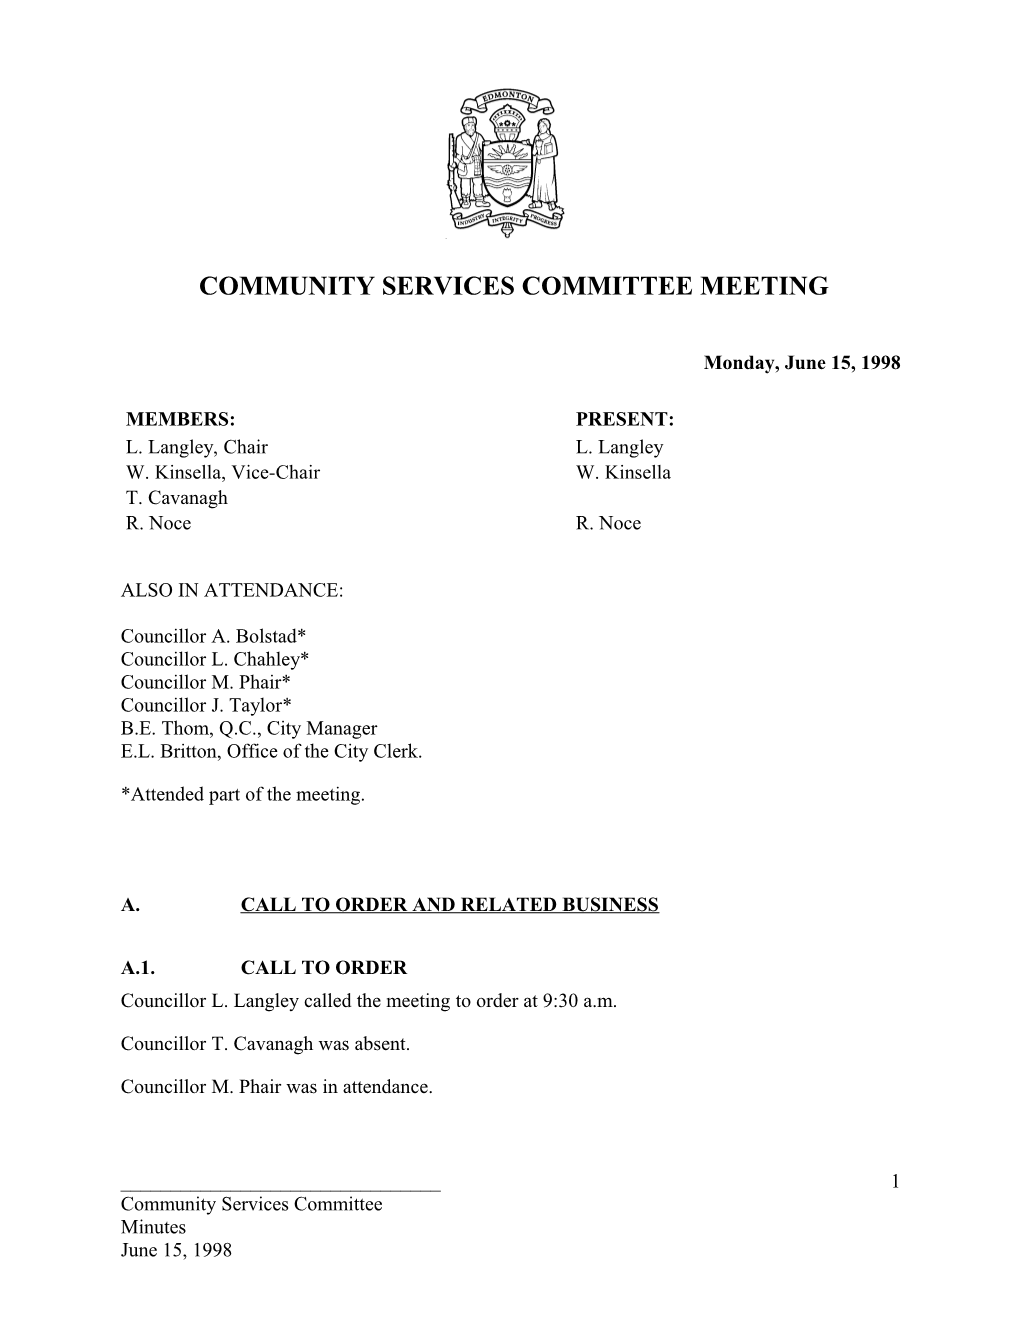 Minutes for Community Services Committee June 15, 1998 Meeting